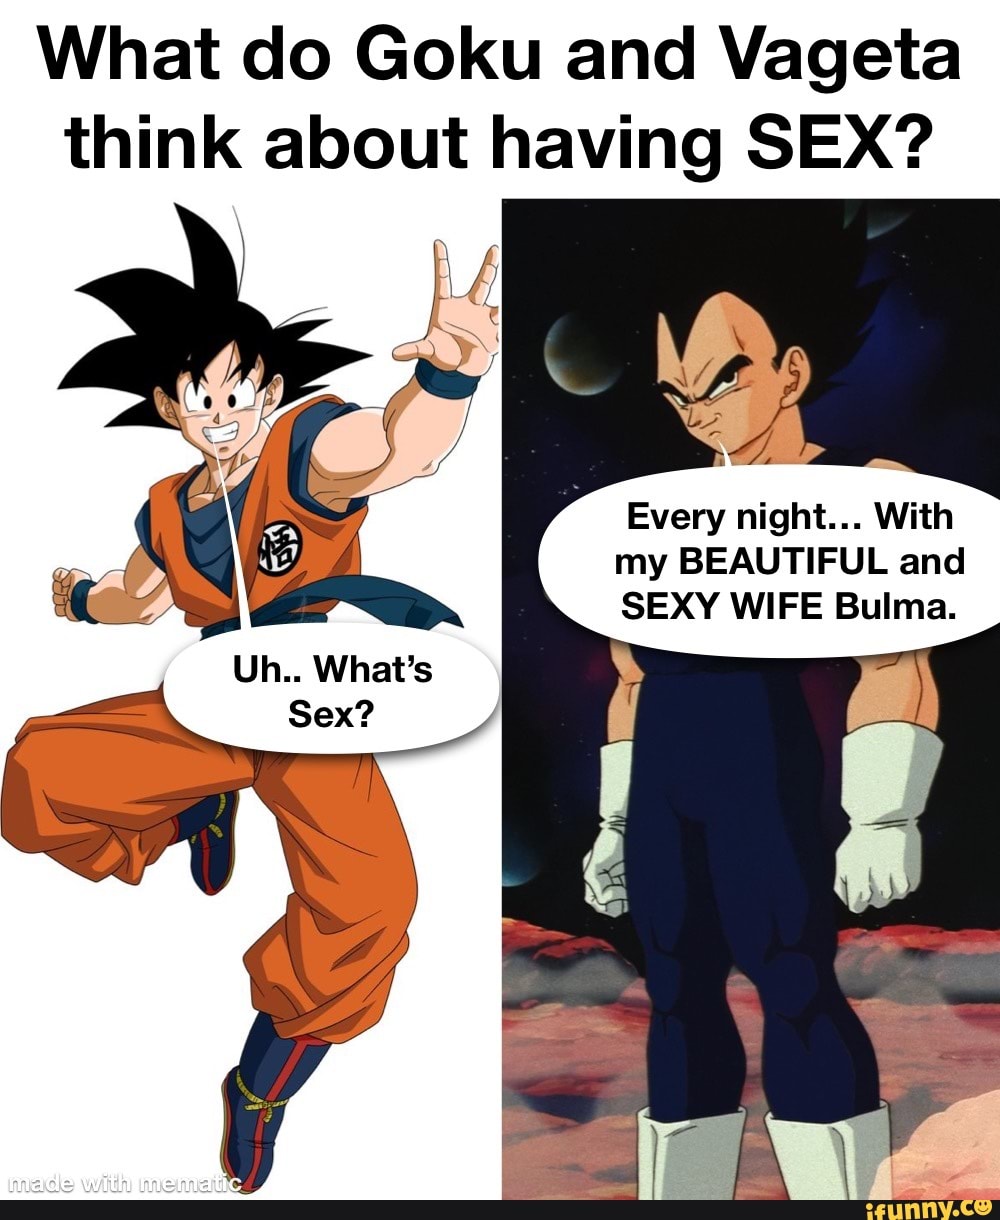 What do Goku and Vageta think about having SEX? Every night... With my BEAUTIFUL and SEXY WIFE Bulma photo